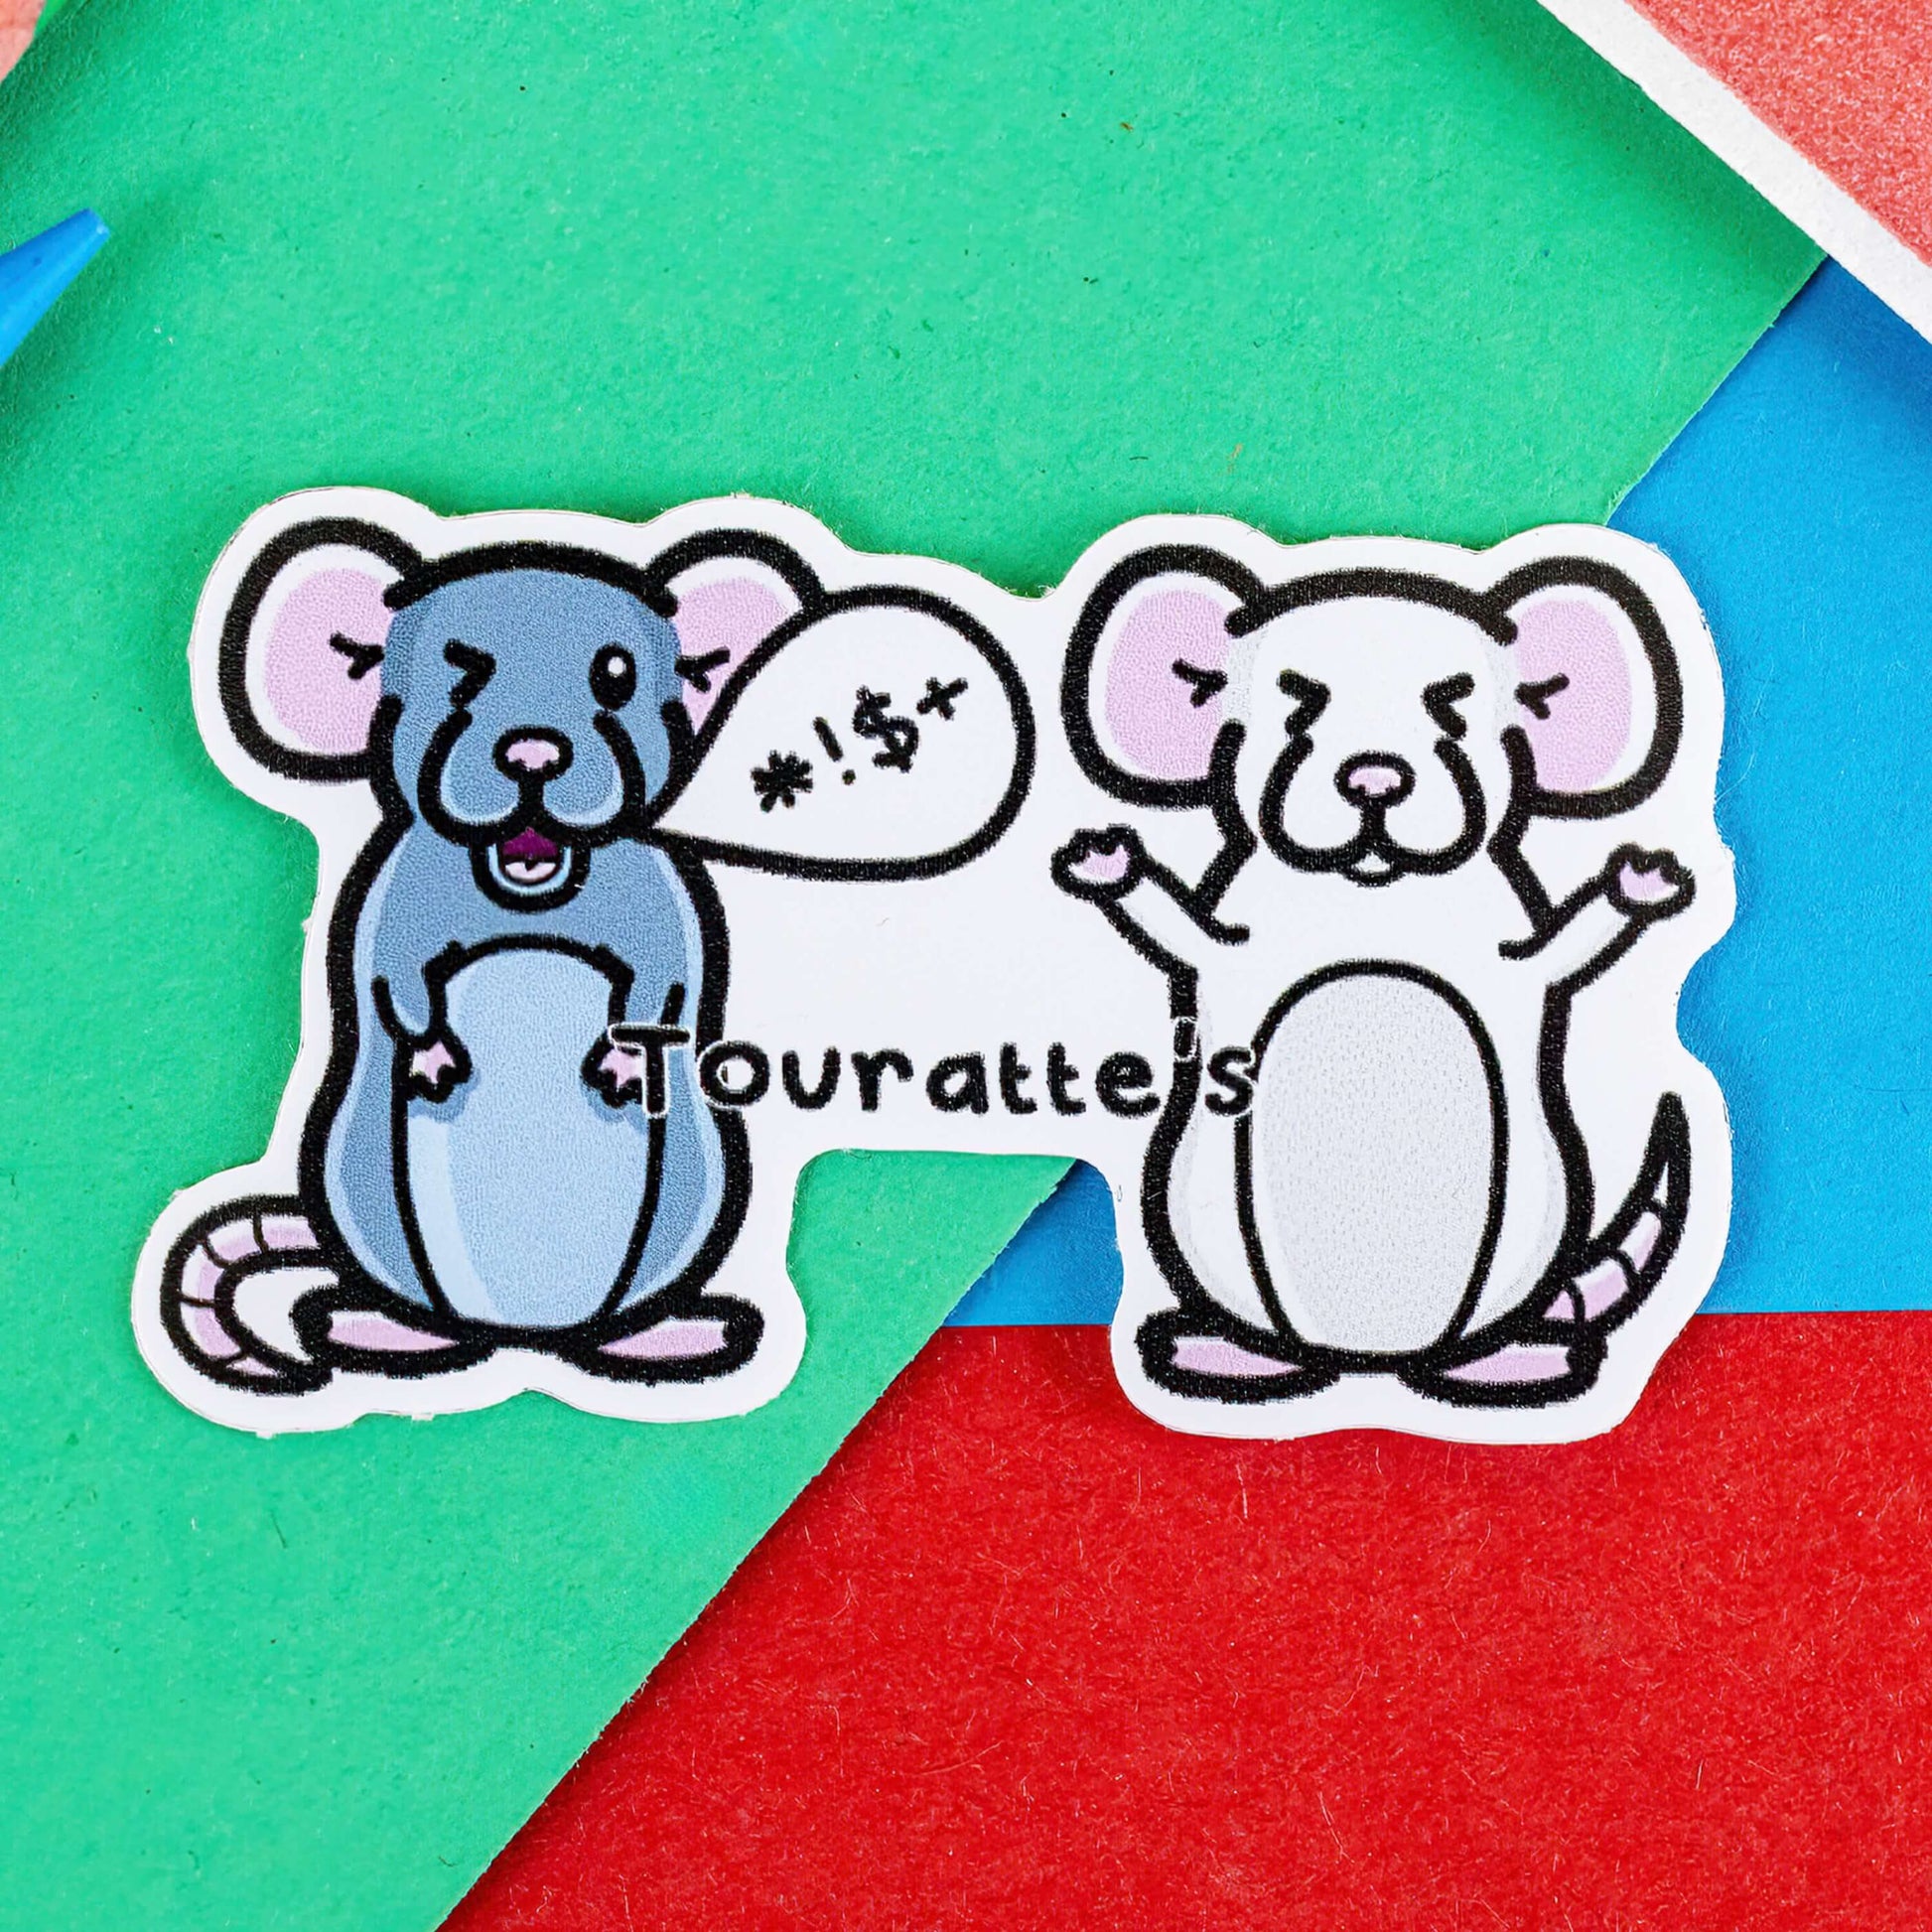 The Touratte's Rat Sticker - Tourette's Syndrome on a red, blue and green background with colouring pencils and red stripe candy bag. The sticker features two rats, one grey rat on the left swearing in a speech bubble and one white rat with its eyes shut, across the middle in black text reads 'touratte's'. The hand drawn design is raising awareness for tourette's syndrome and tics.